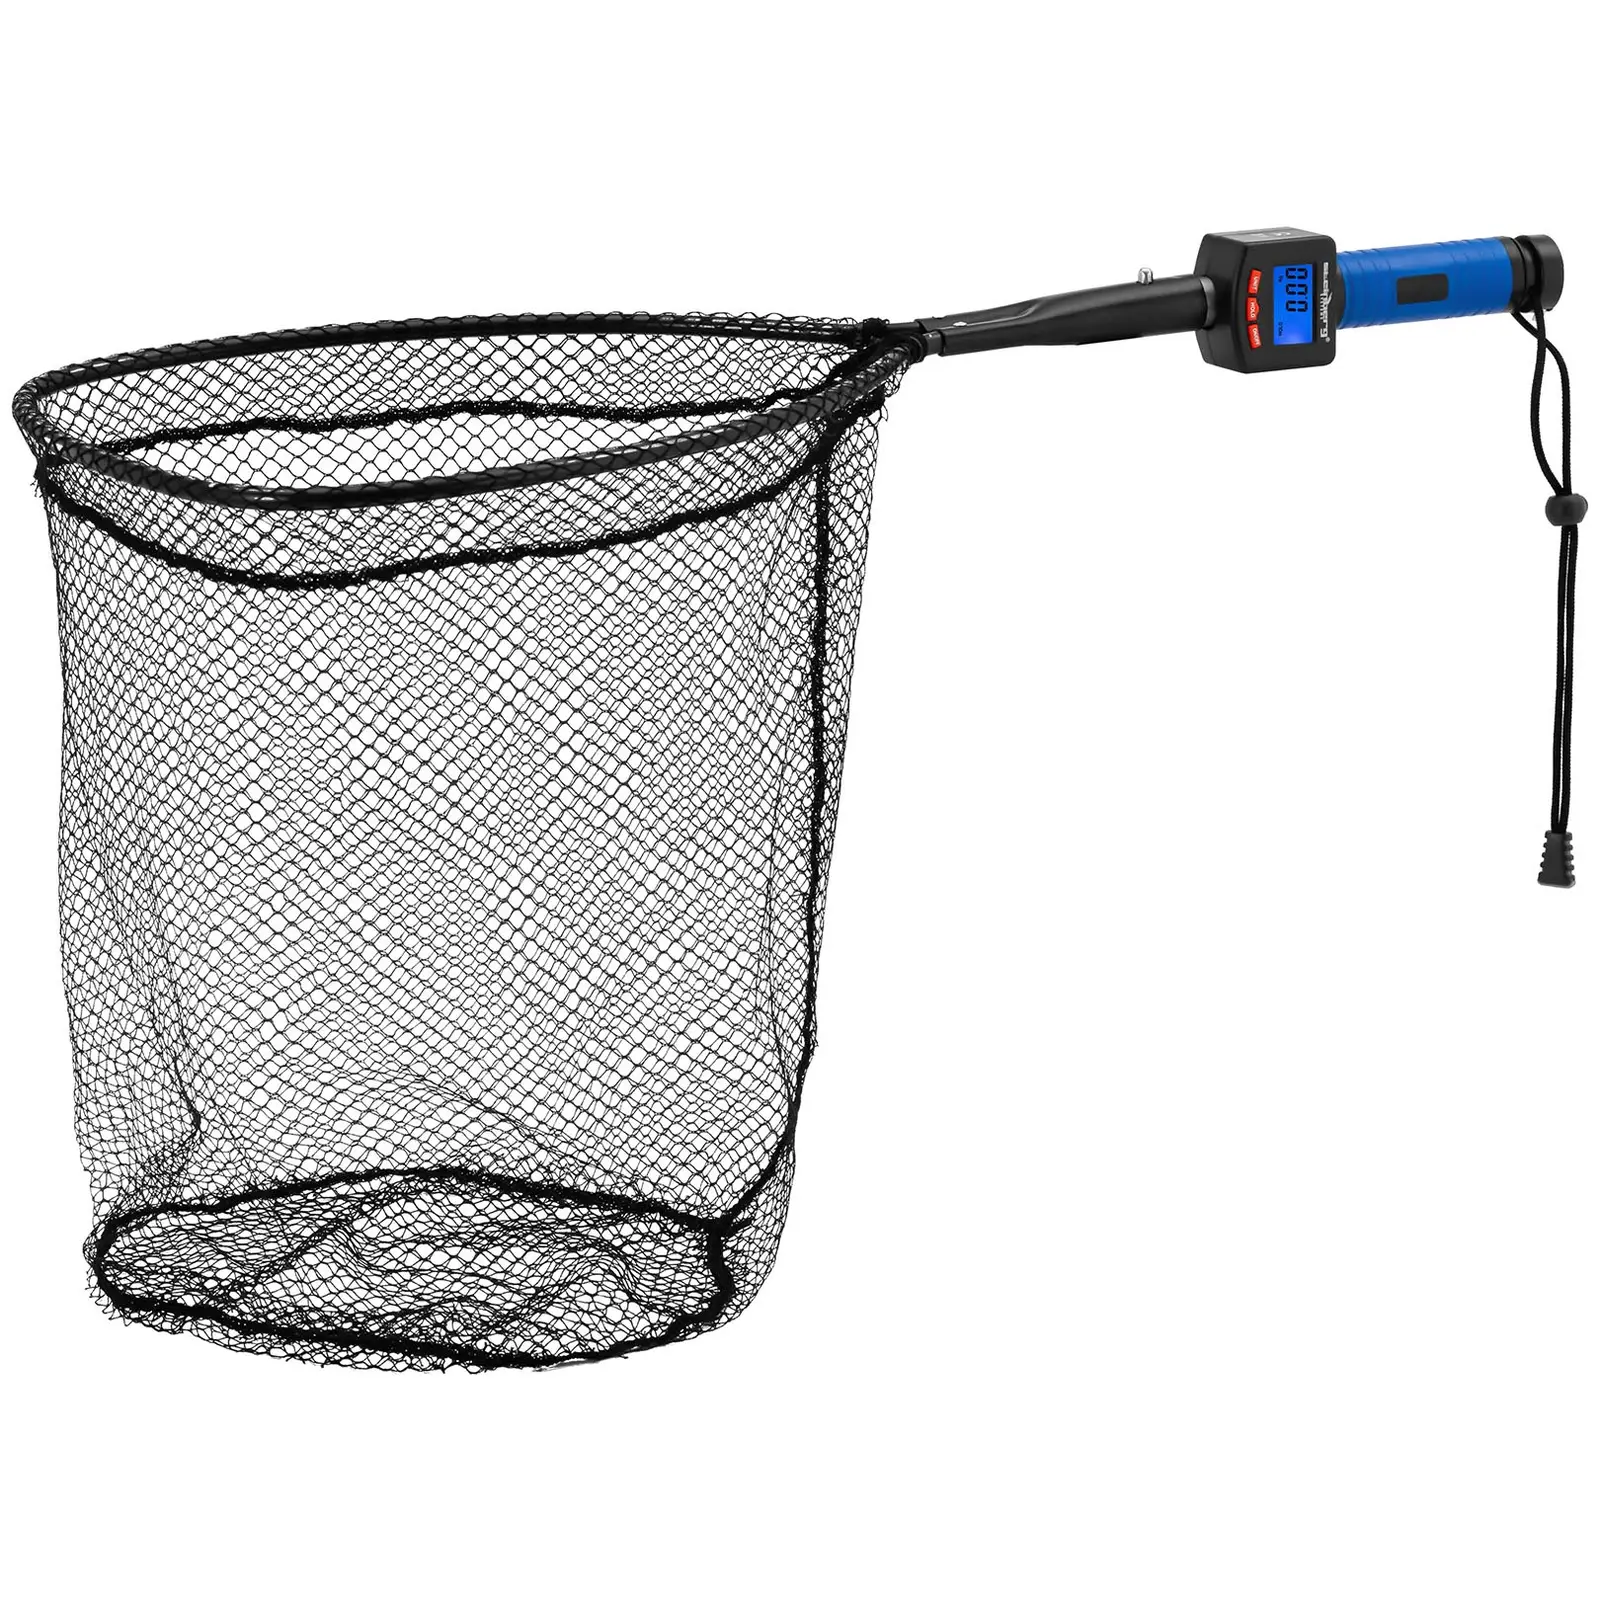 Fishing Net Scale - with thermometer - foldable - LCD - 30 cm - up to 25 kg - kg / lb / oz